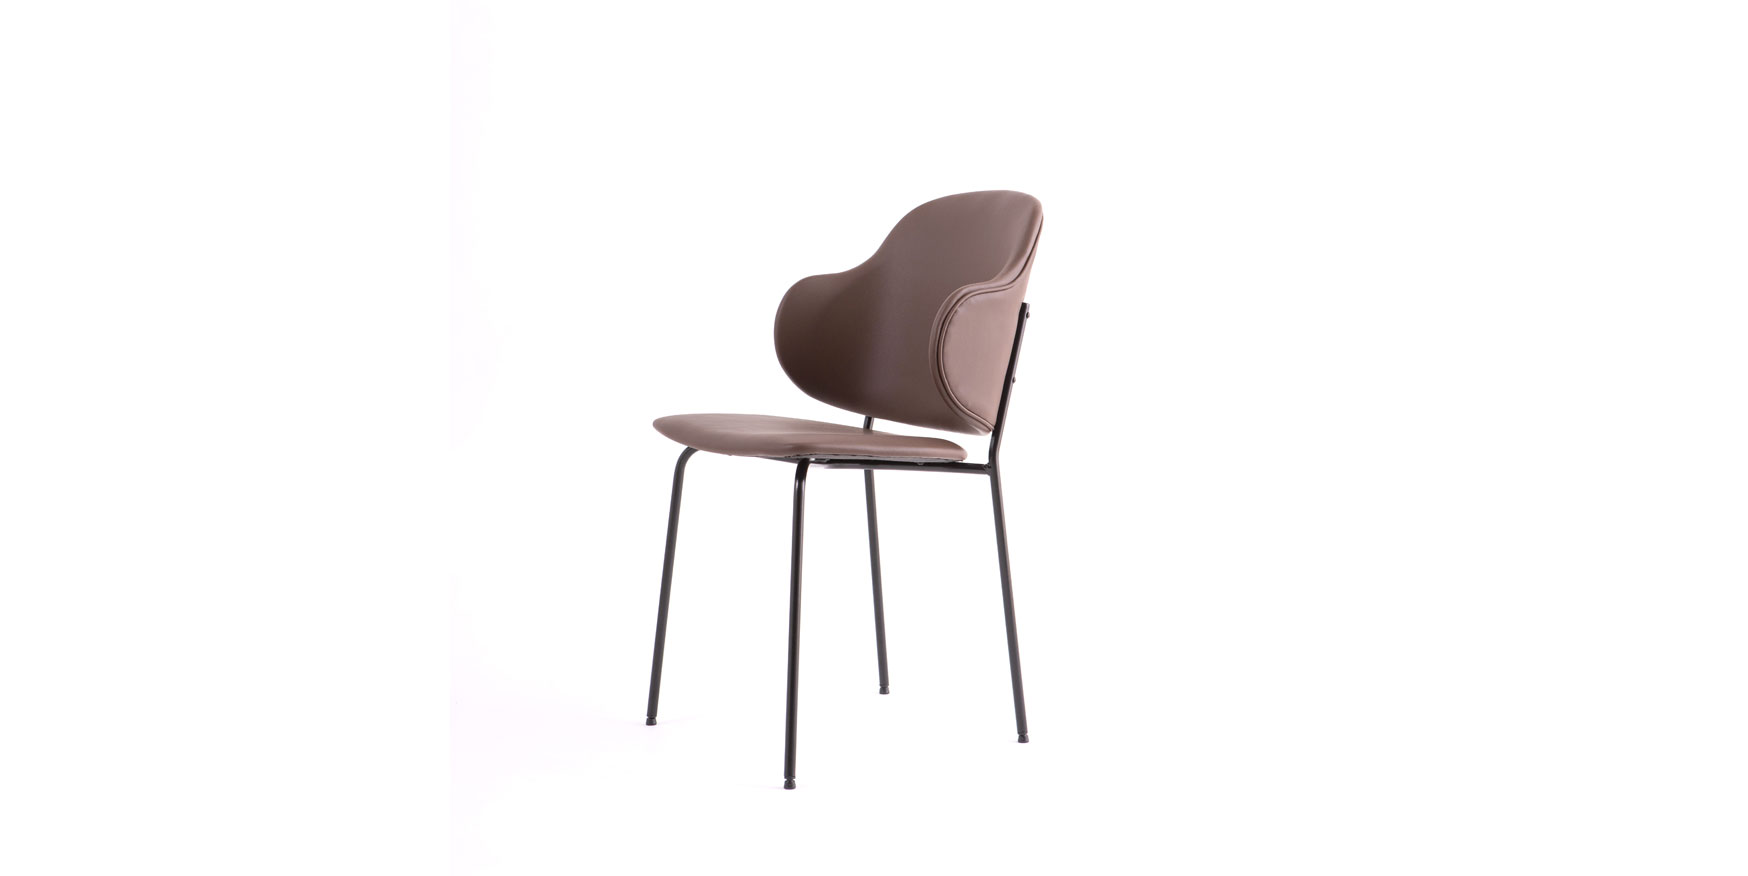 thonet bentwood dining chairs
